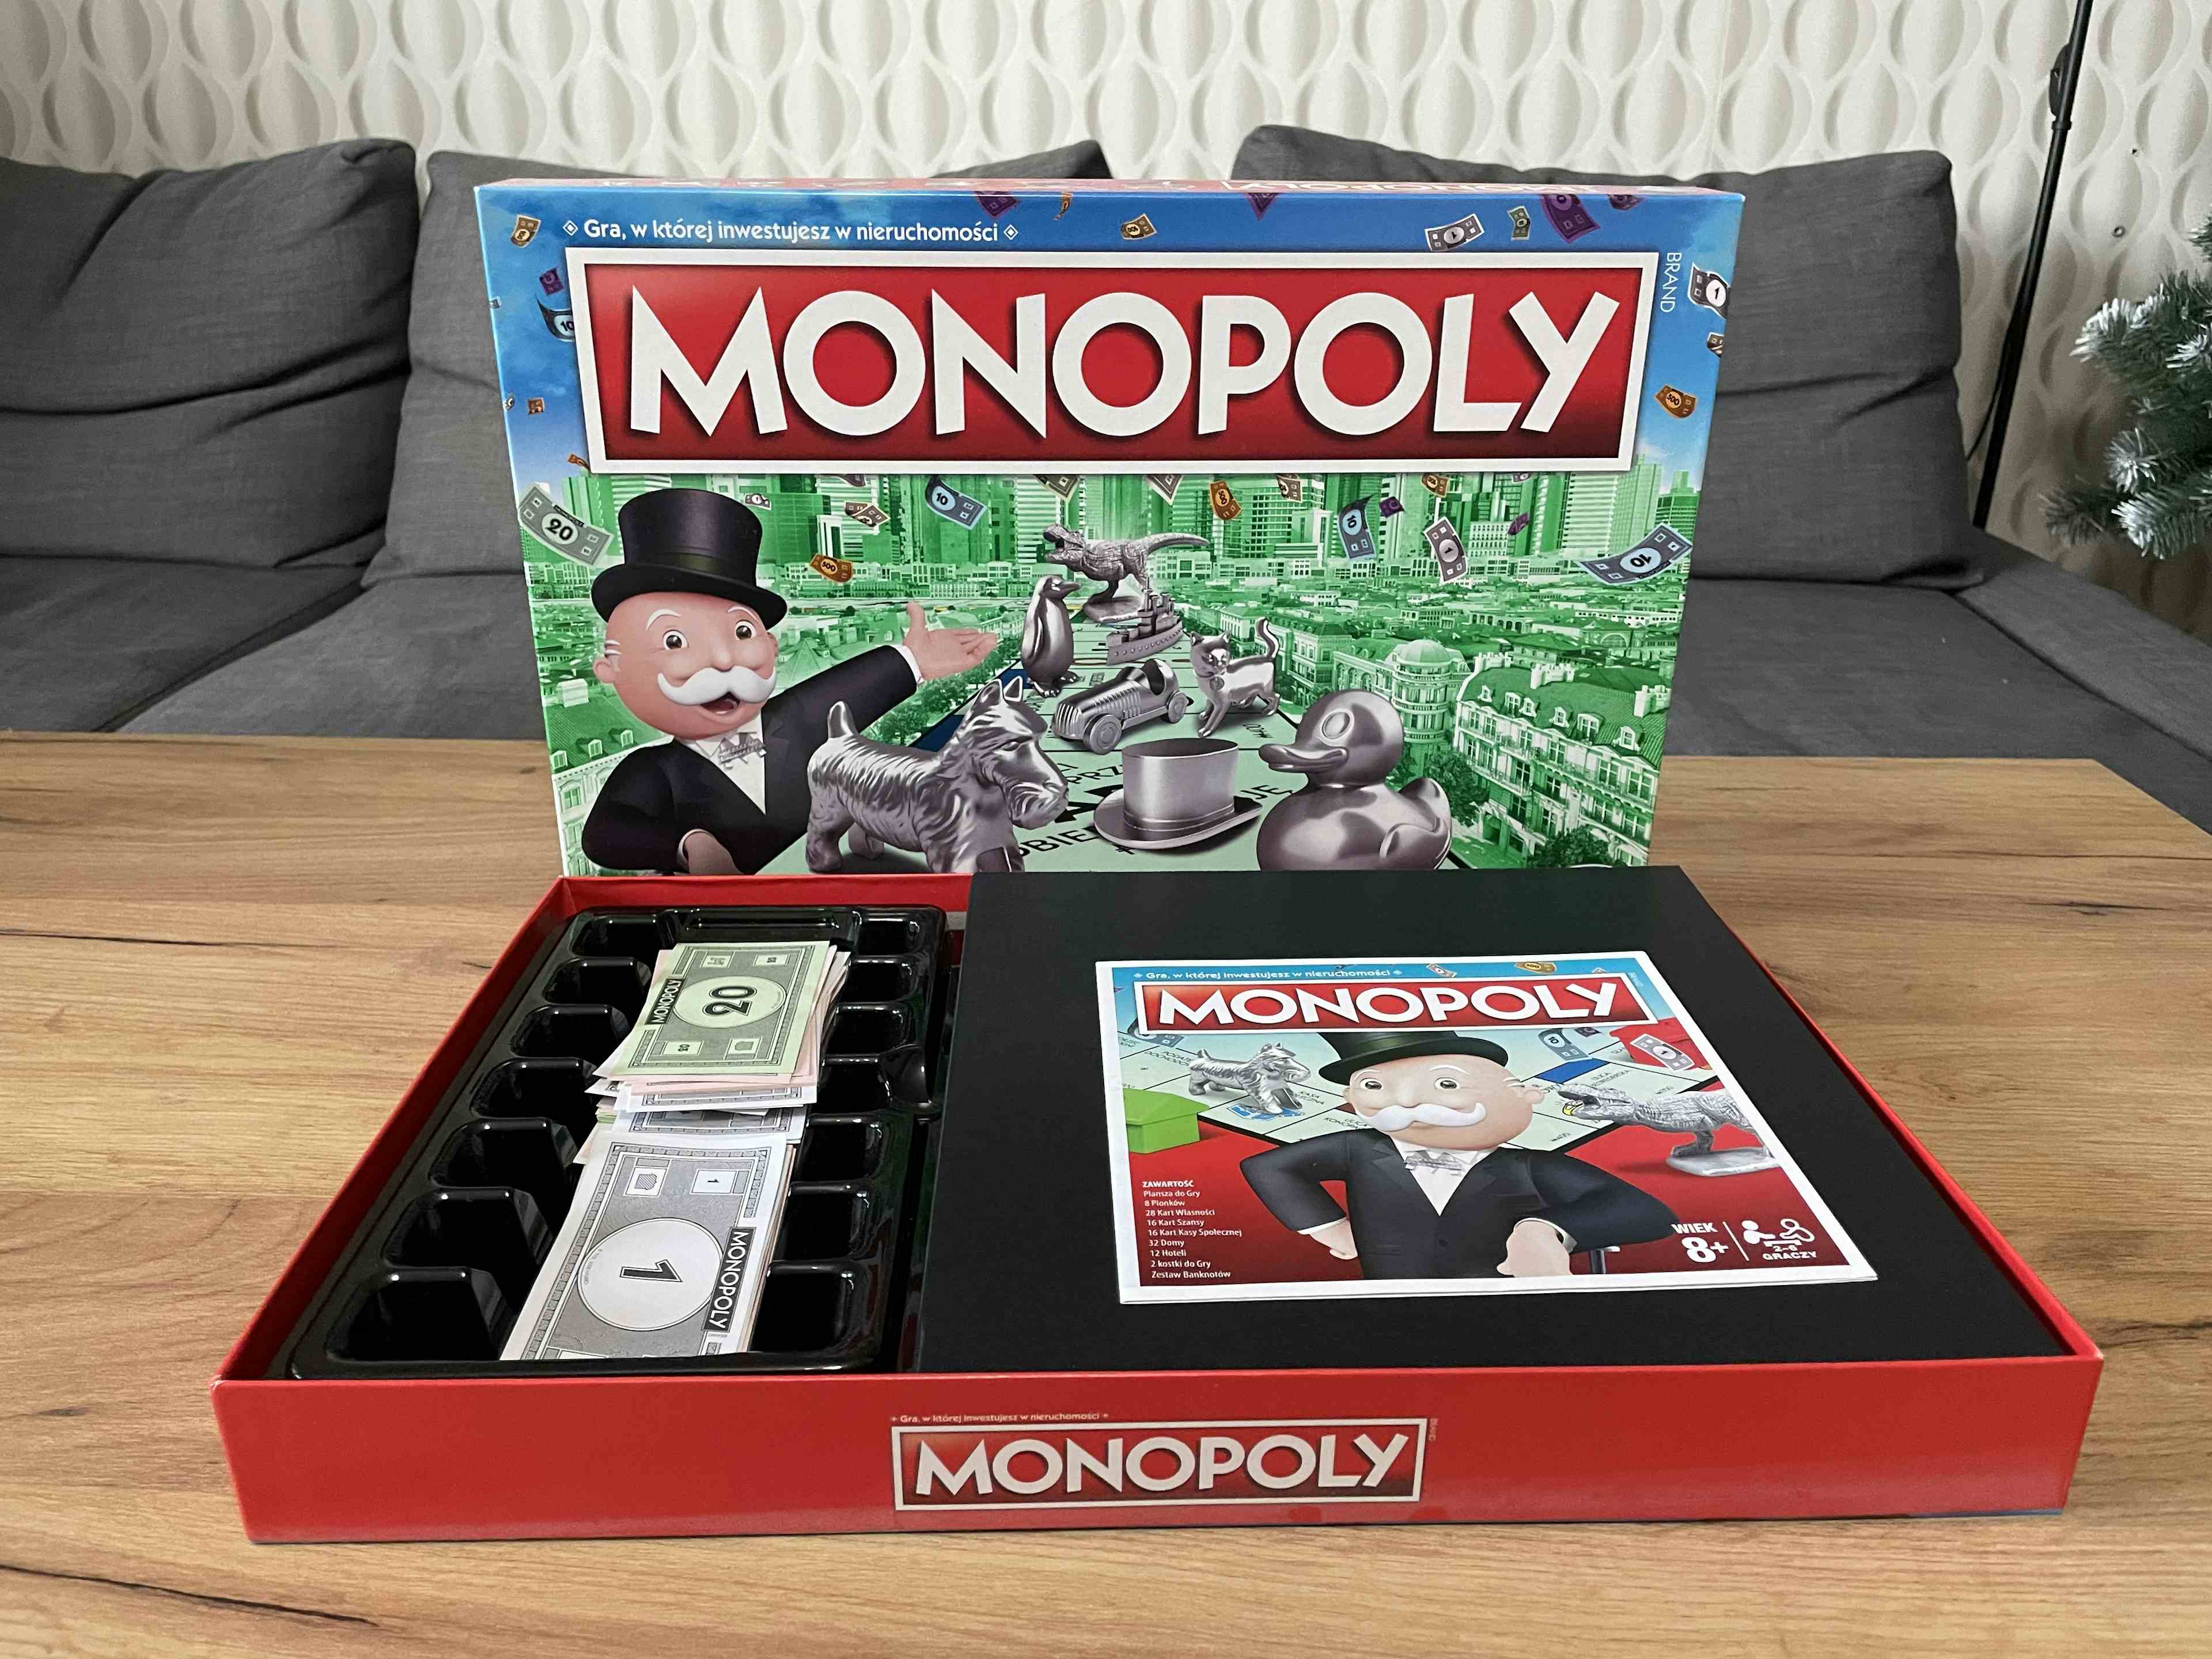 Primary picture of Gra planszowa "Monopoly"